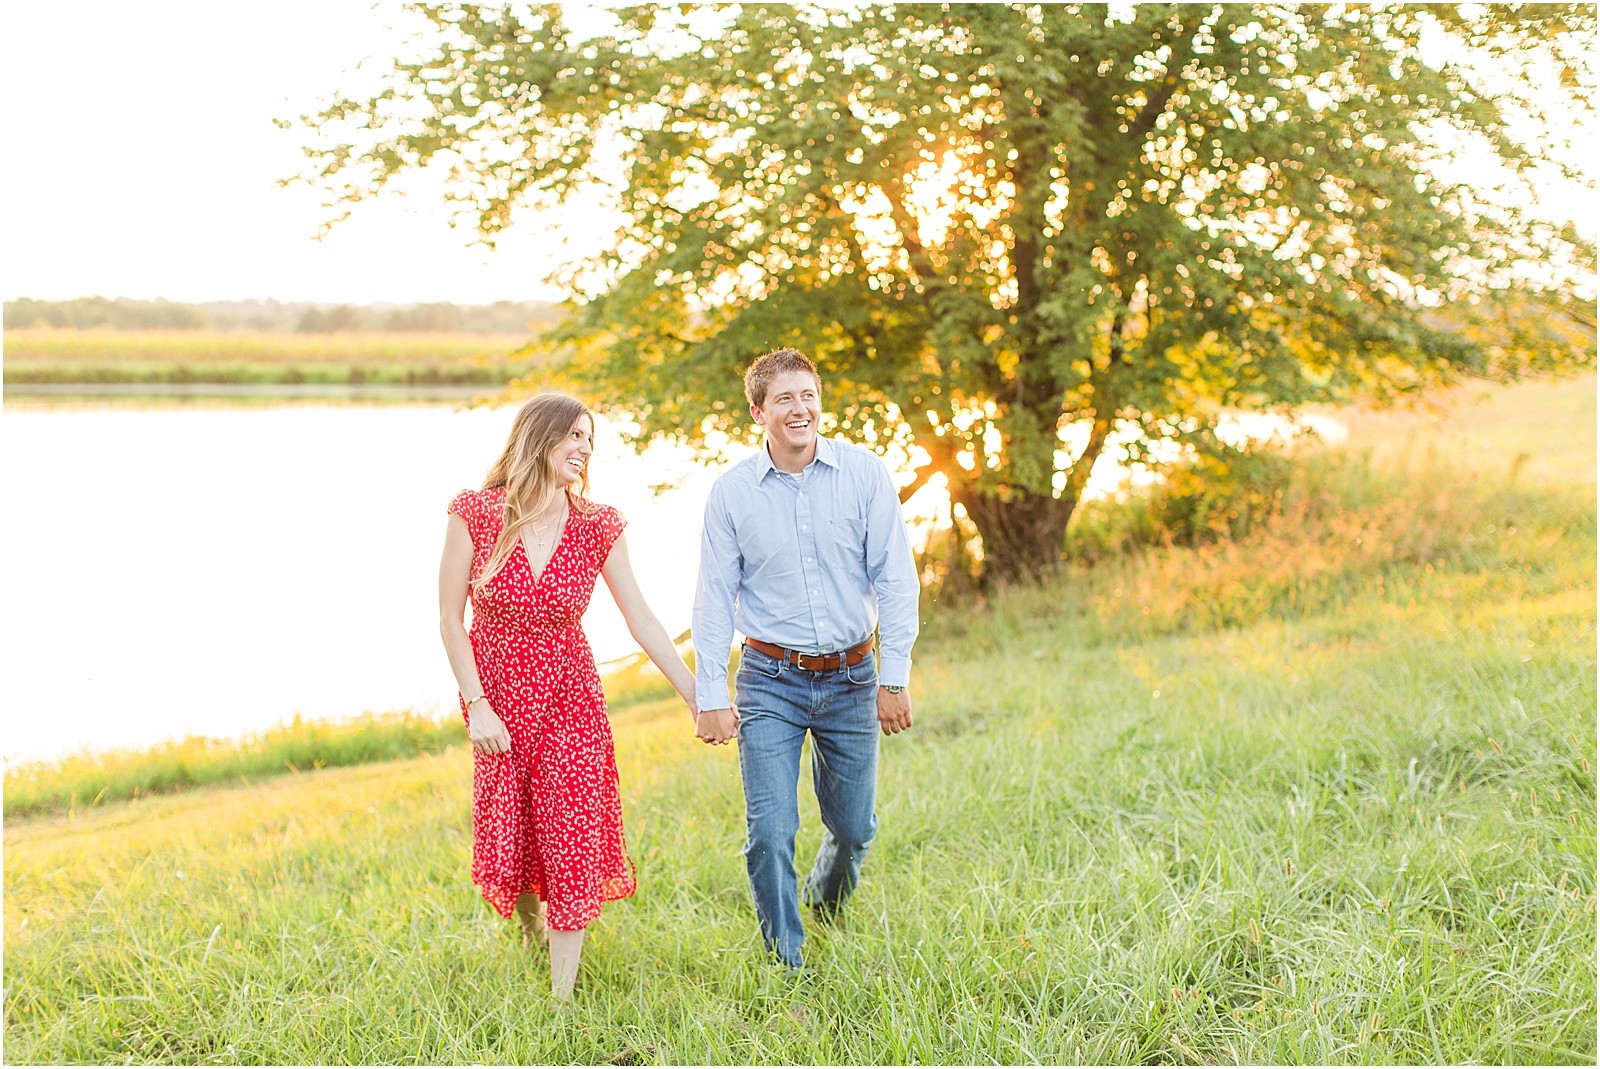 A Jasper Indiana Engagement Session | Tori and Kyle | Bret and Brandie Photography044.jpg